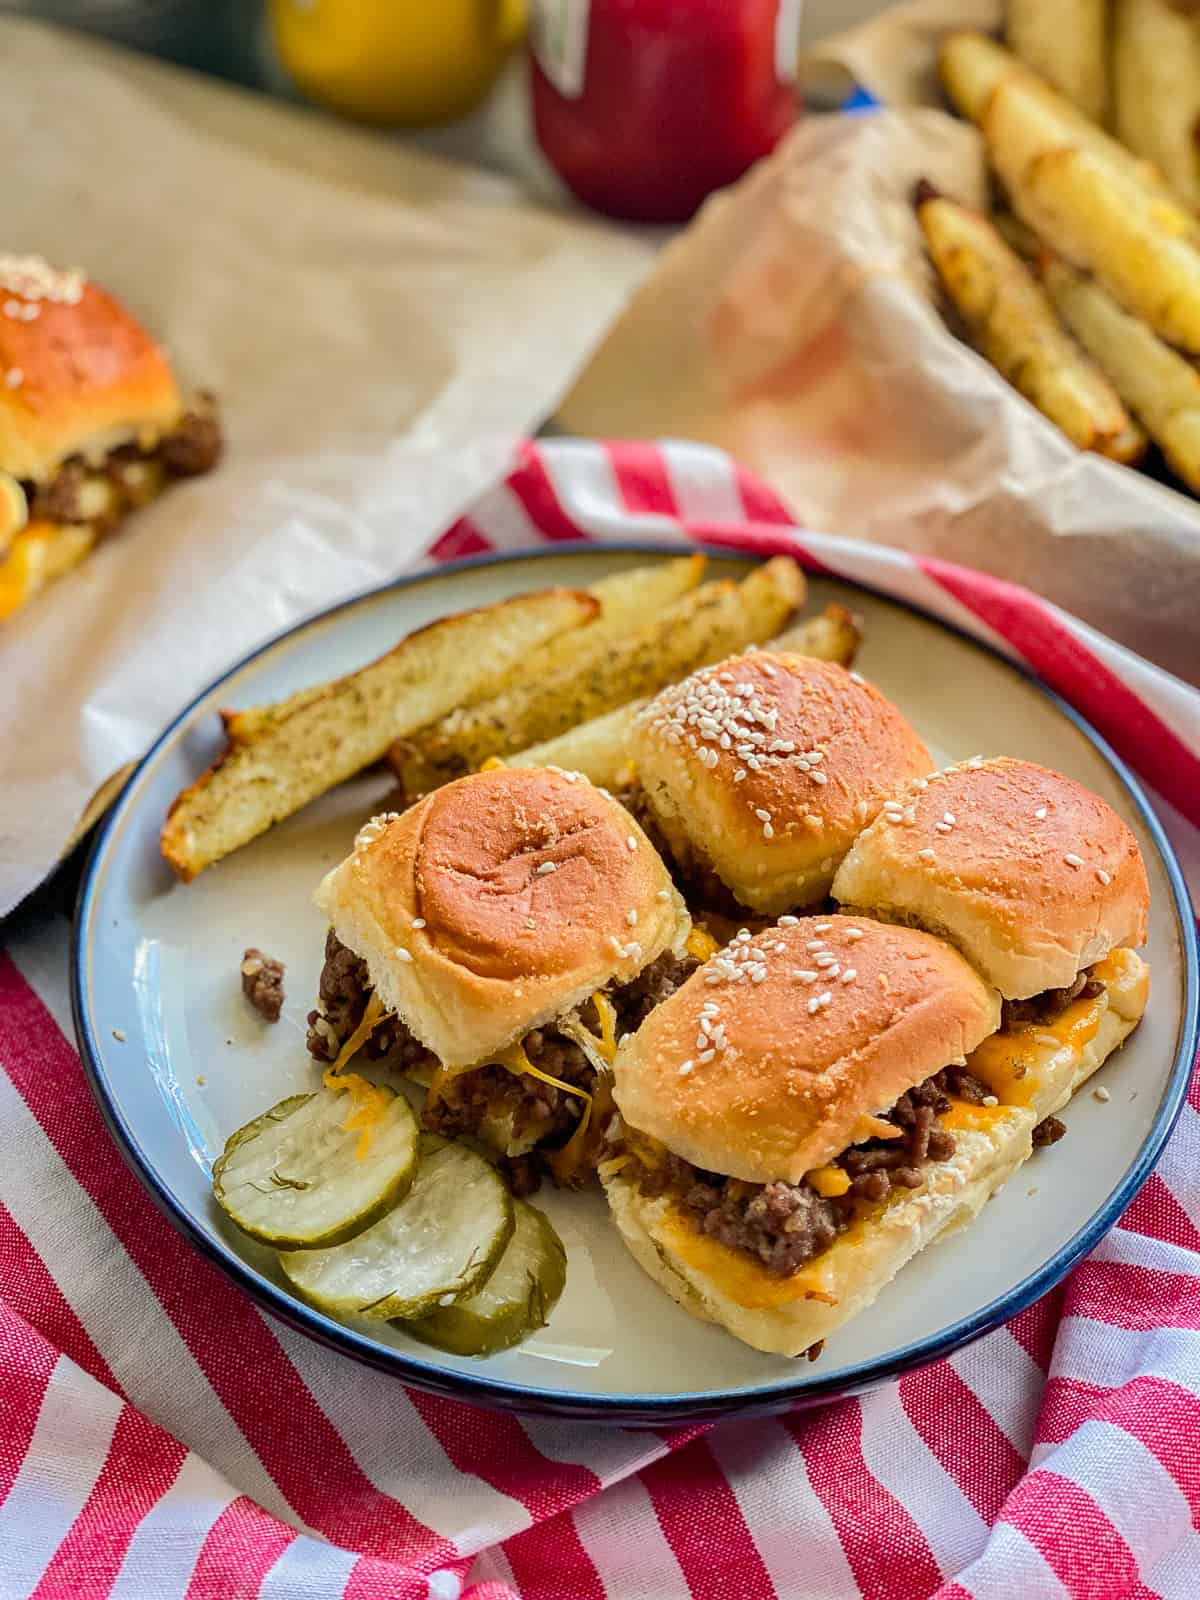 White plate filled with 4 sliders with 3 pickle slices and potato wedges on a red and white striped cloth.